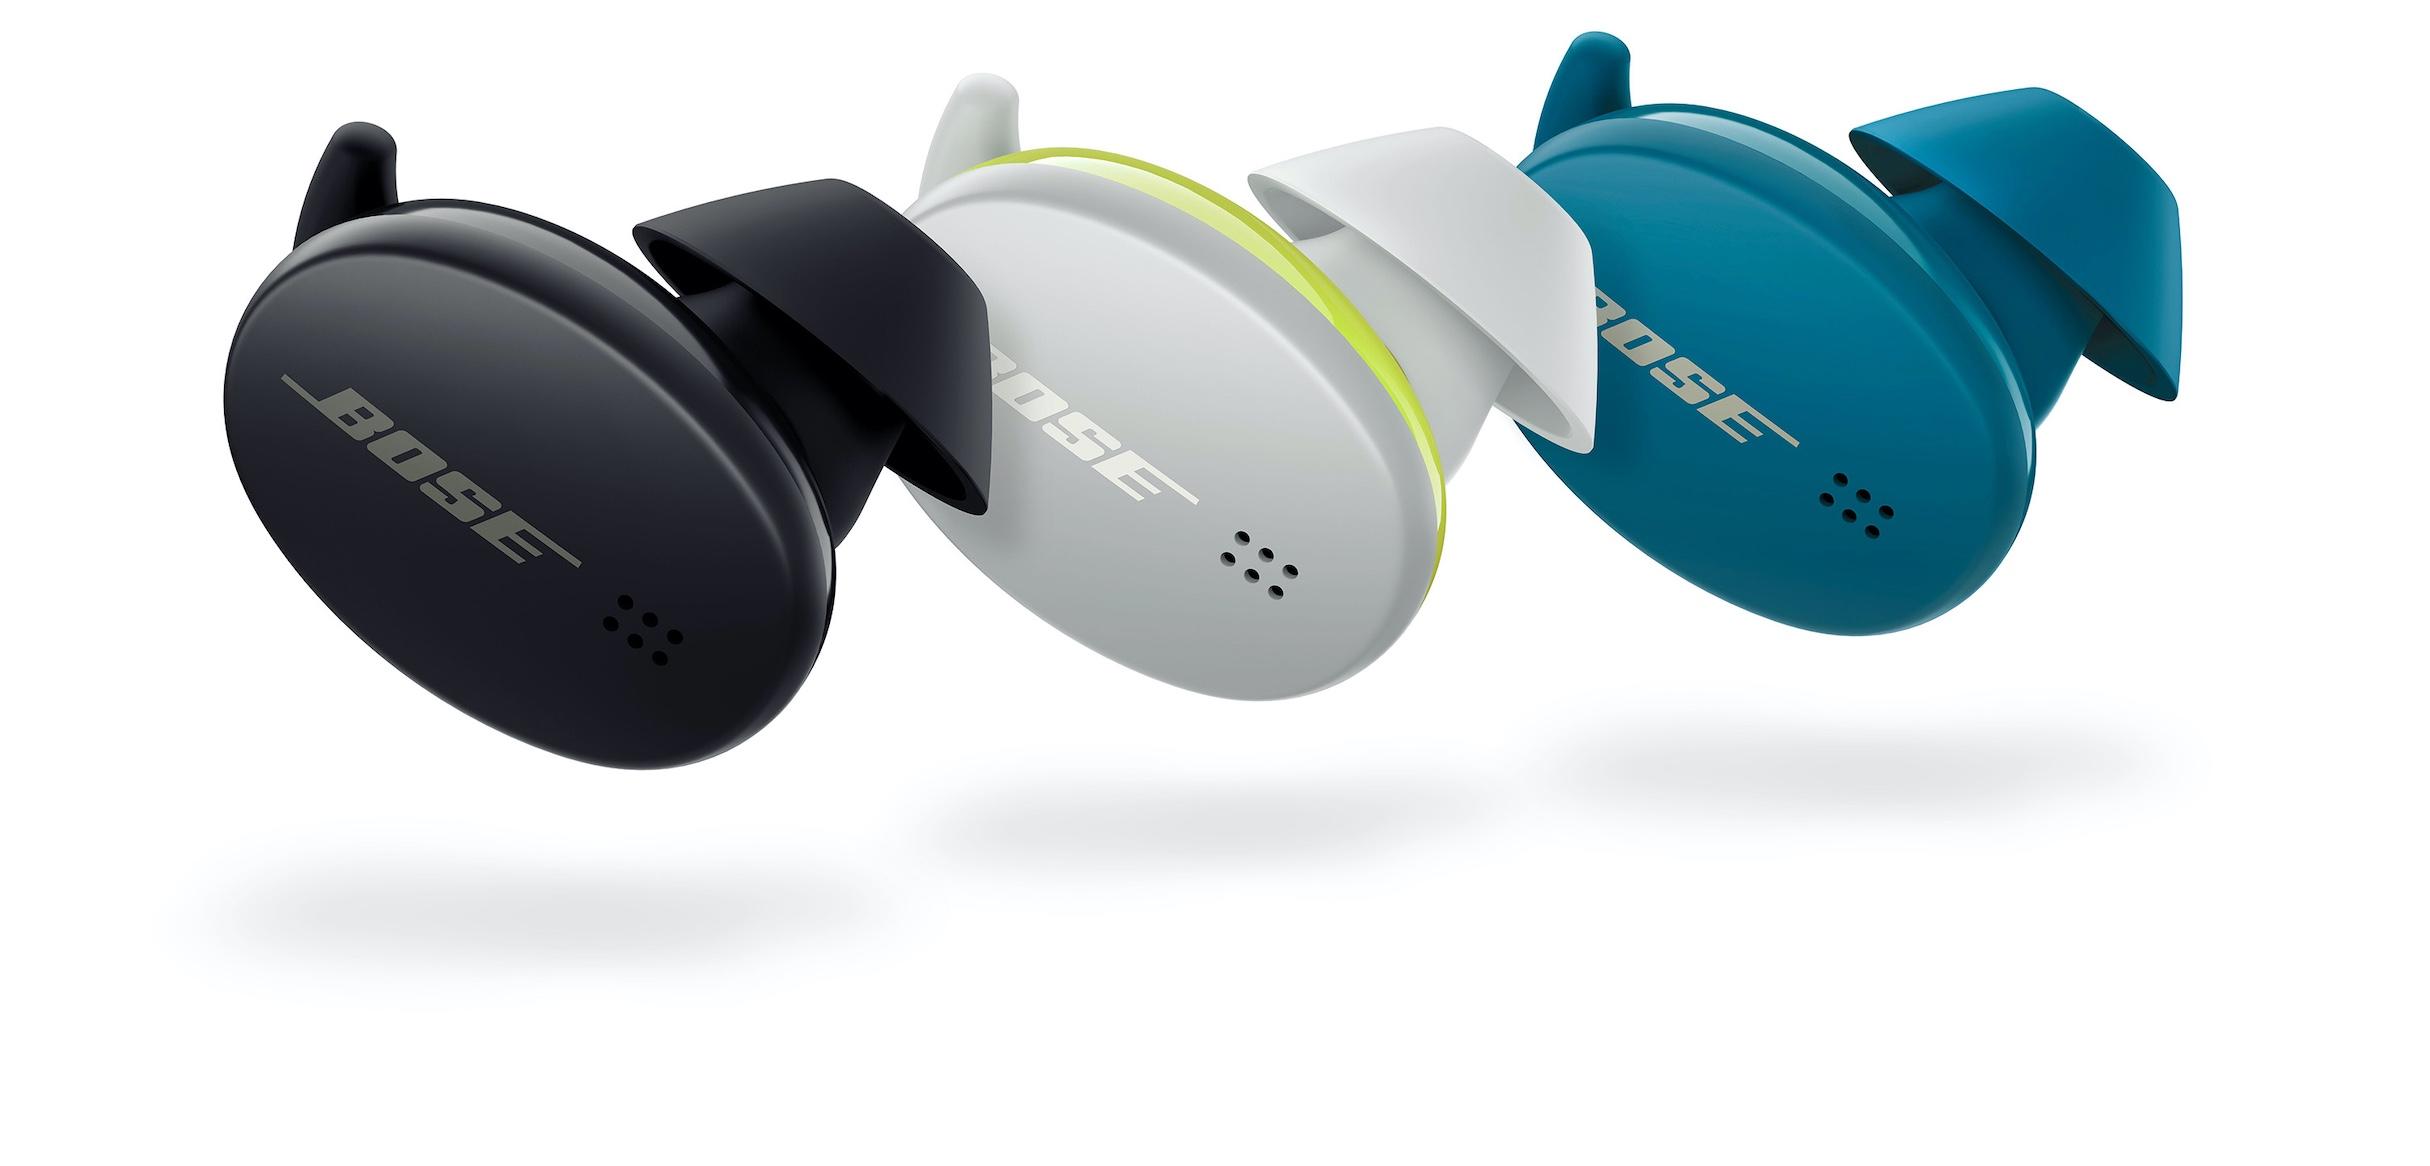 Bose Sport Earbuds Review: excellent sound meets robust design